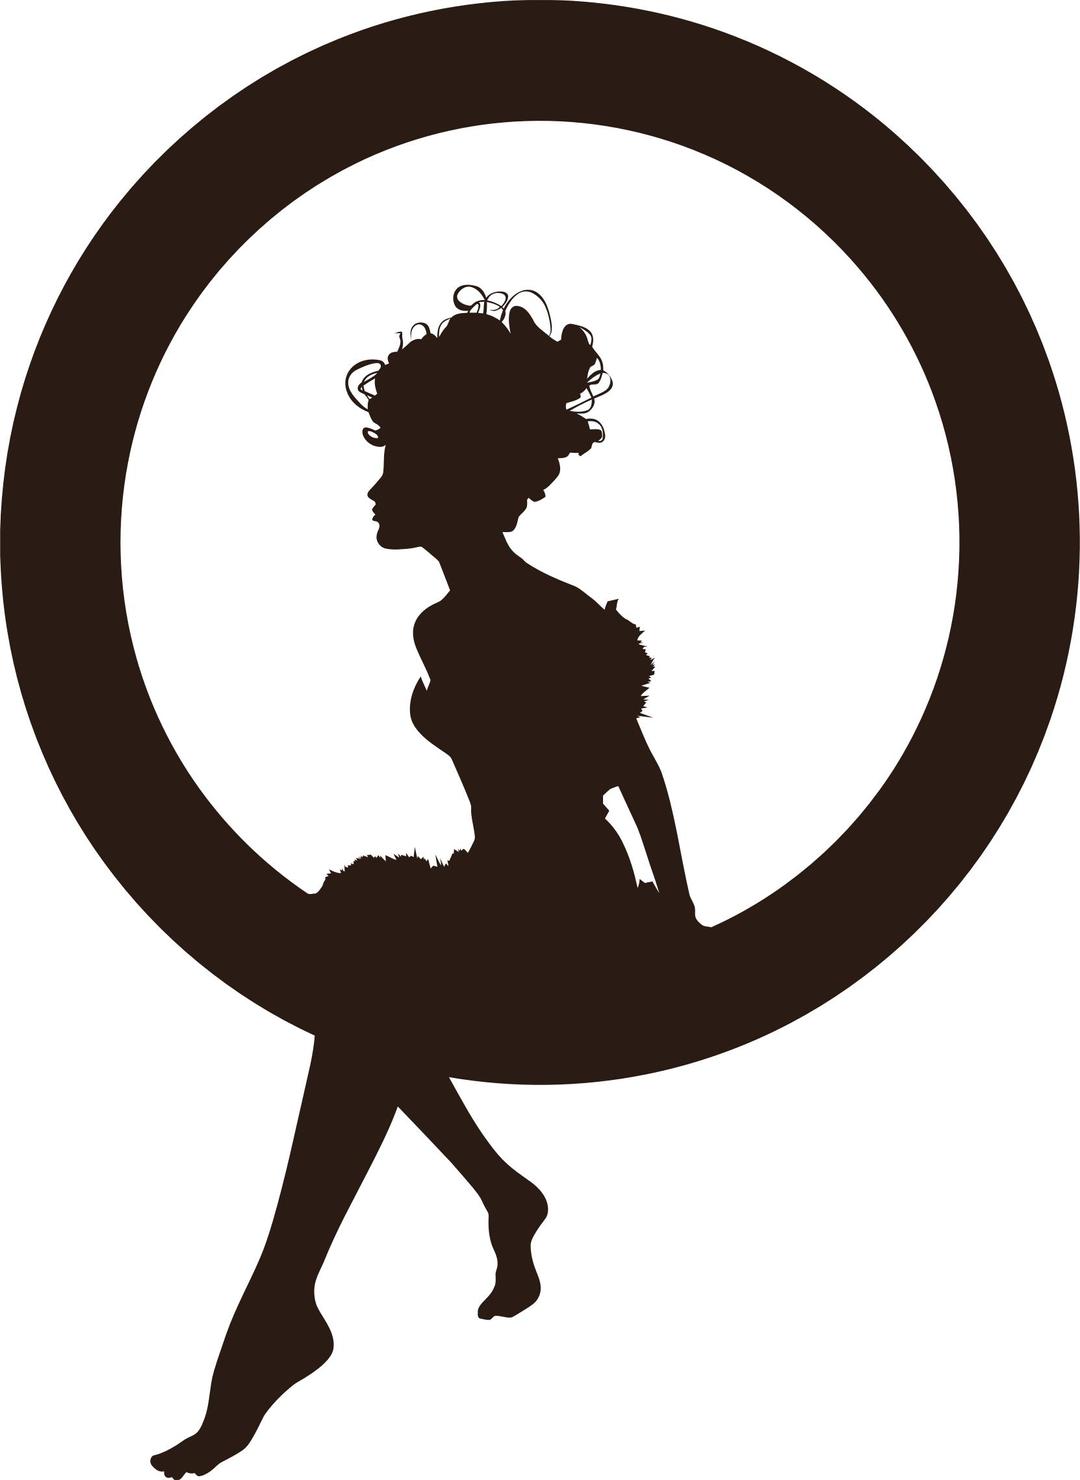 Fairy Sitting In Circle Silhouette png transparent